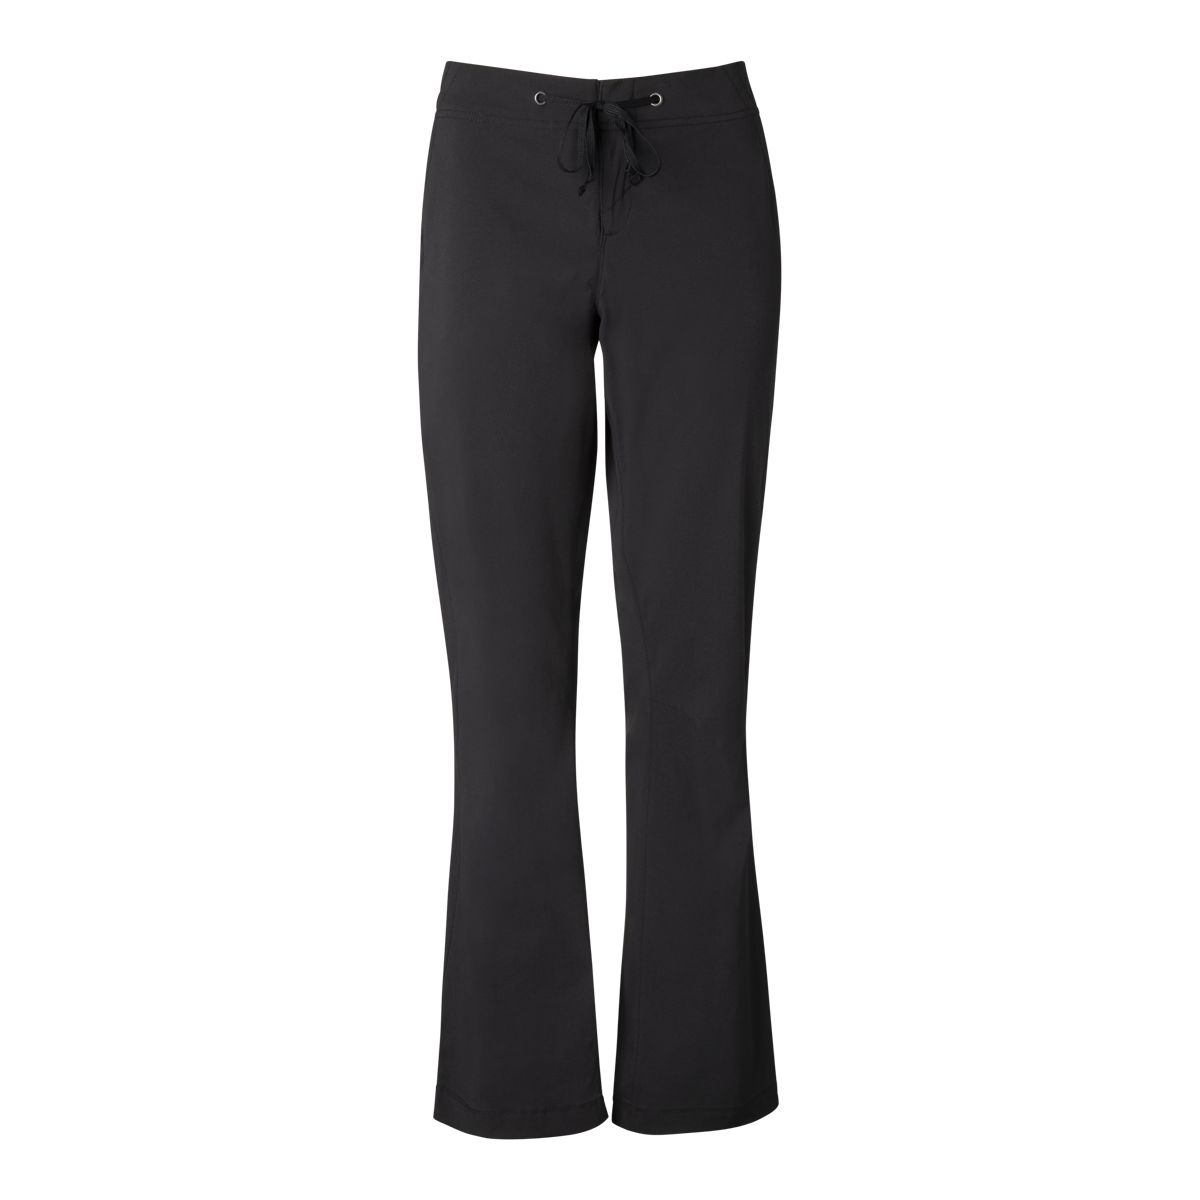 Athletic Works Plus Size Womens Dri More Bootcut Pants  Yoga Fitness Activewear  Active Pants